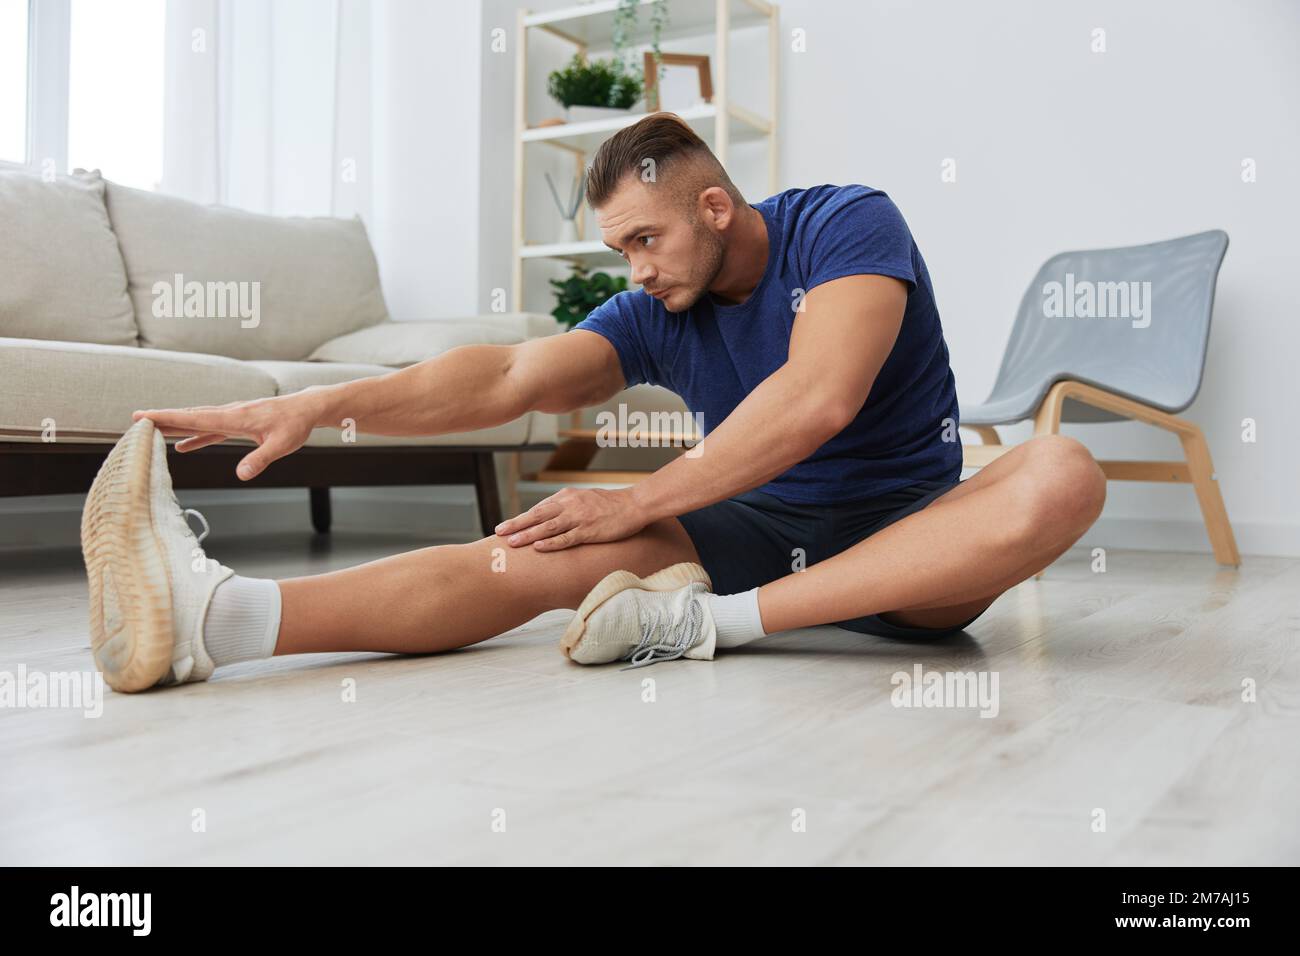 Man sportsman training at home, stretching exercises for arm, leg